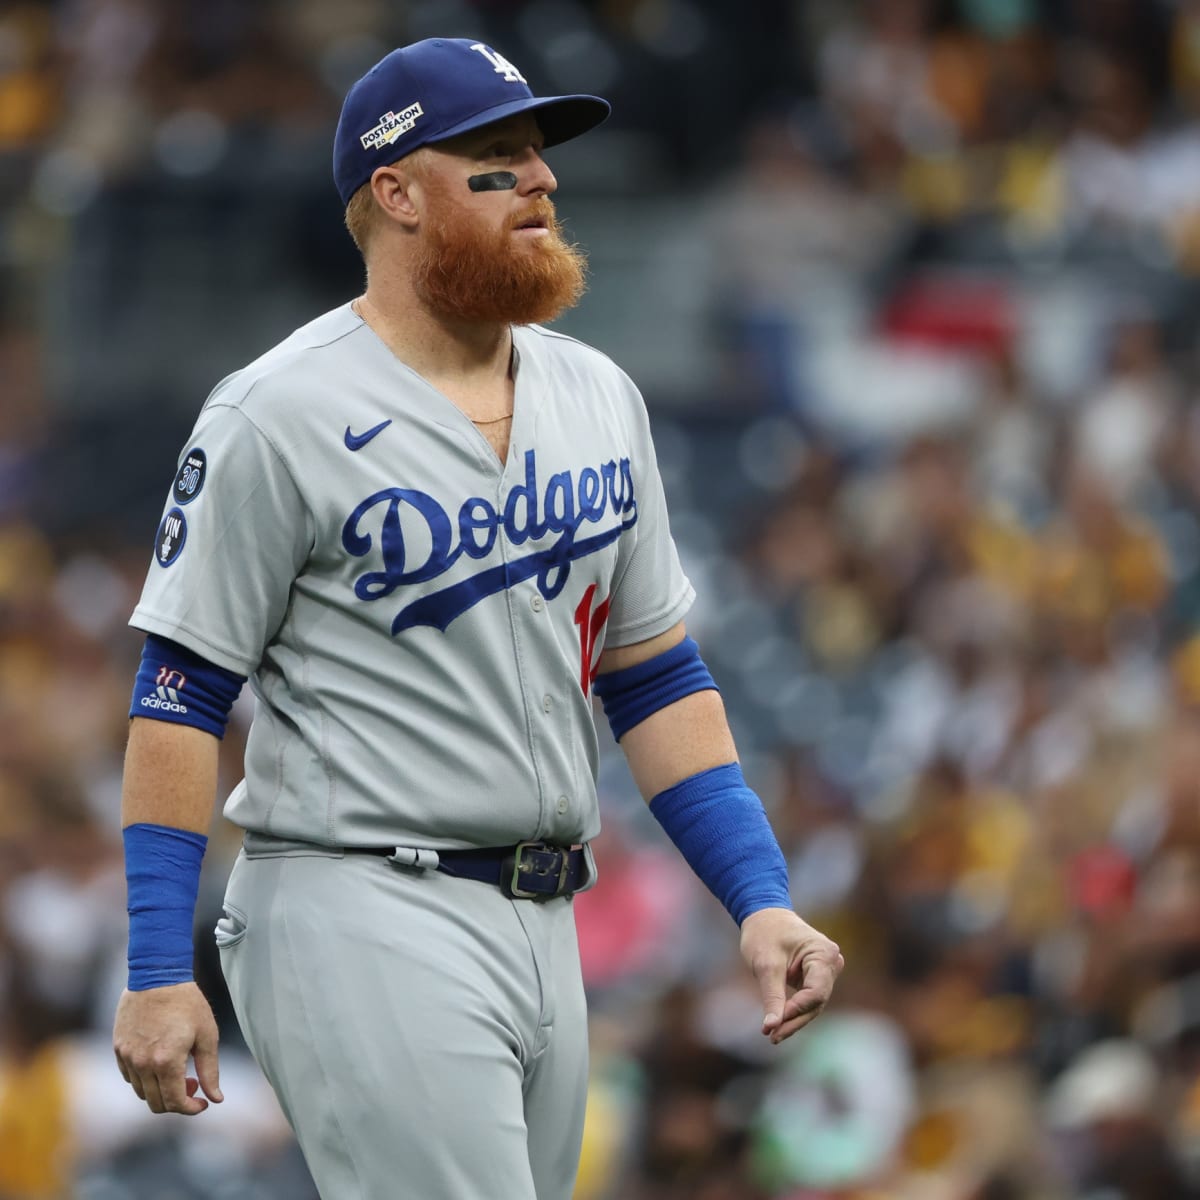 Dodgers 2019 Roster: What Lies Ahead for Justin Turner? – Think Blue  Planning Committee